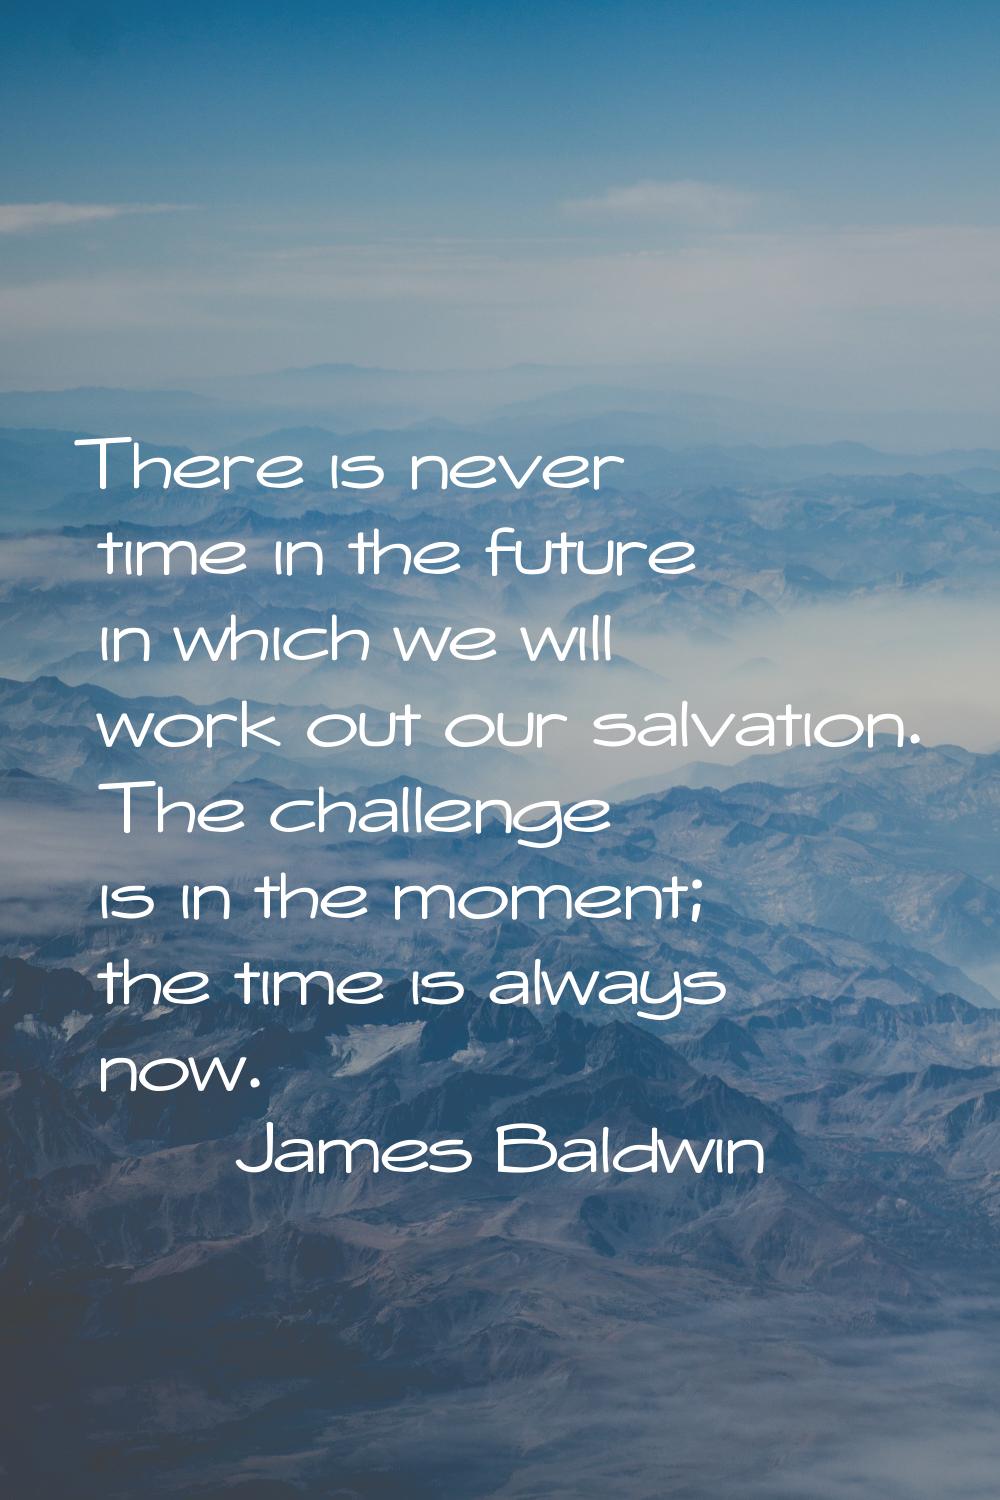 There is never time in the future in which we will work out our salvation. The challenge is in the 